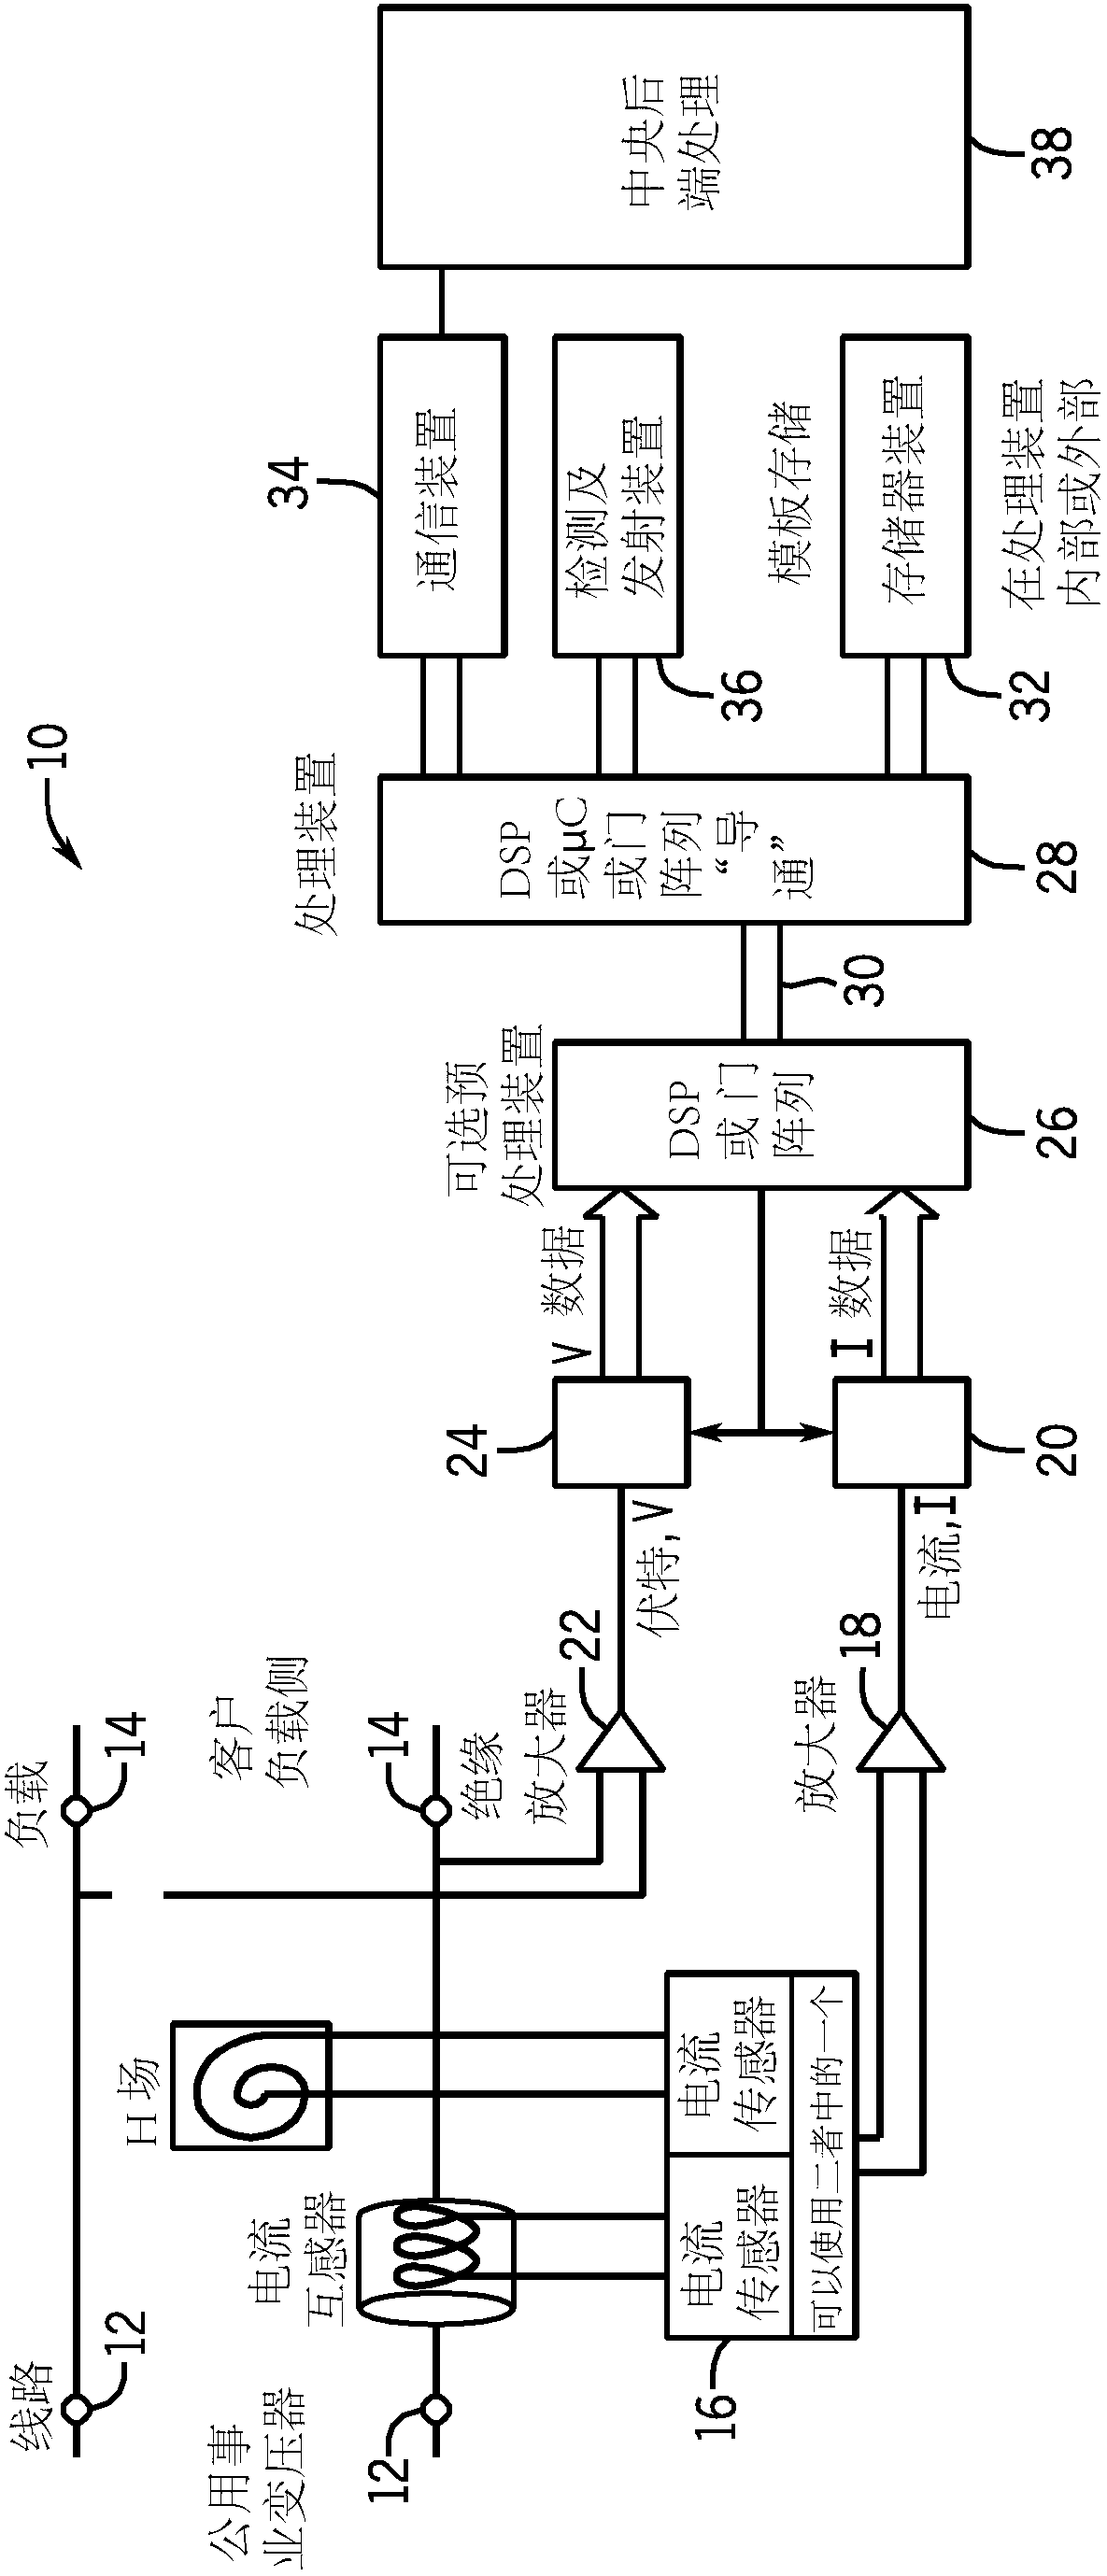 Electric utility meter comprising load identifying data processor